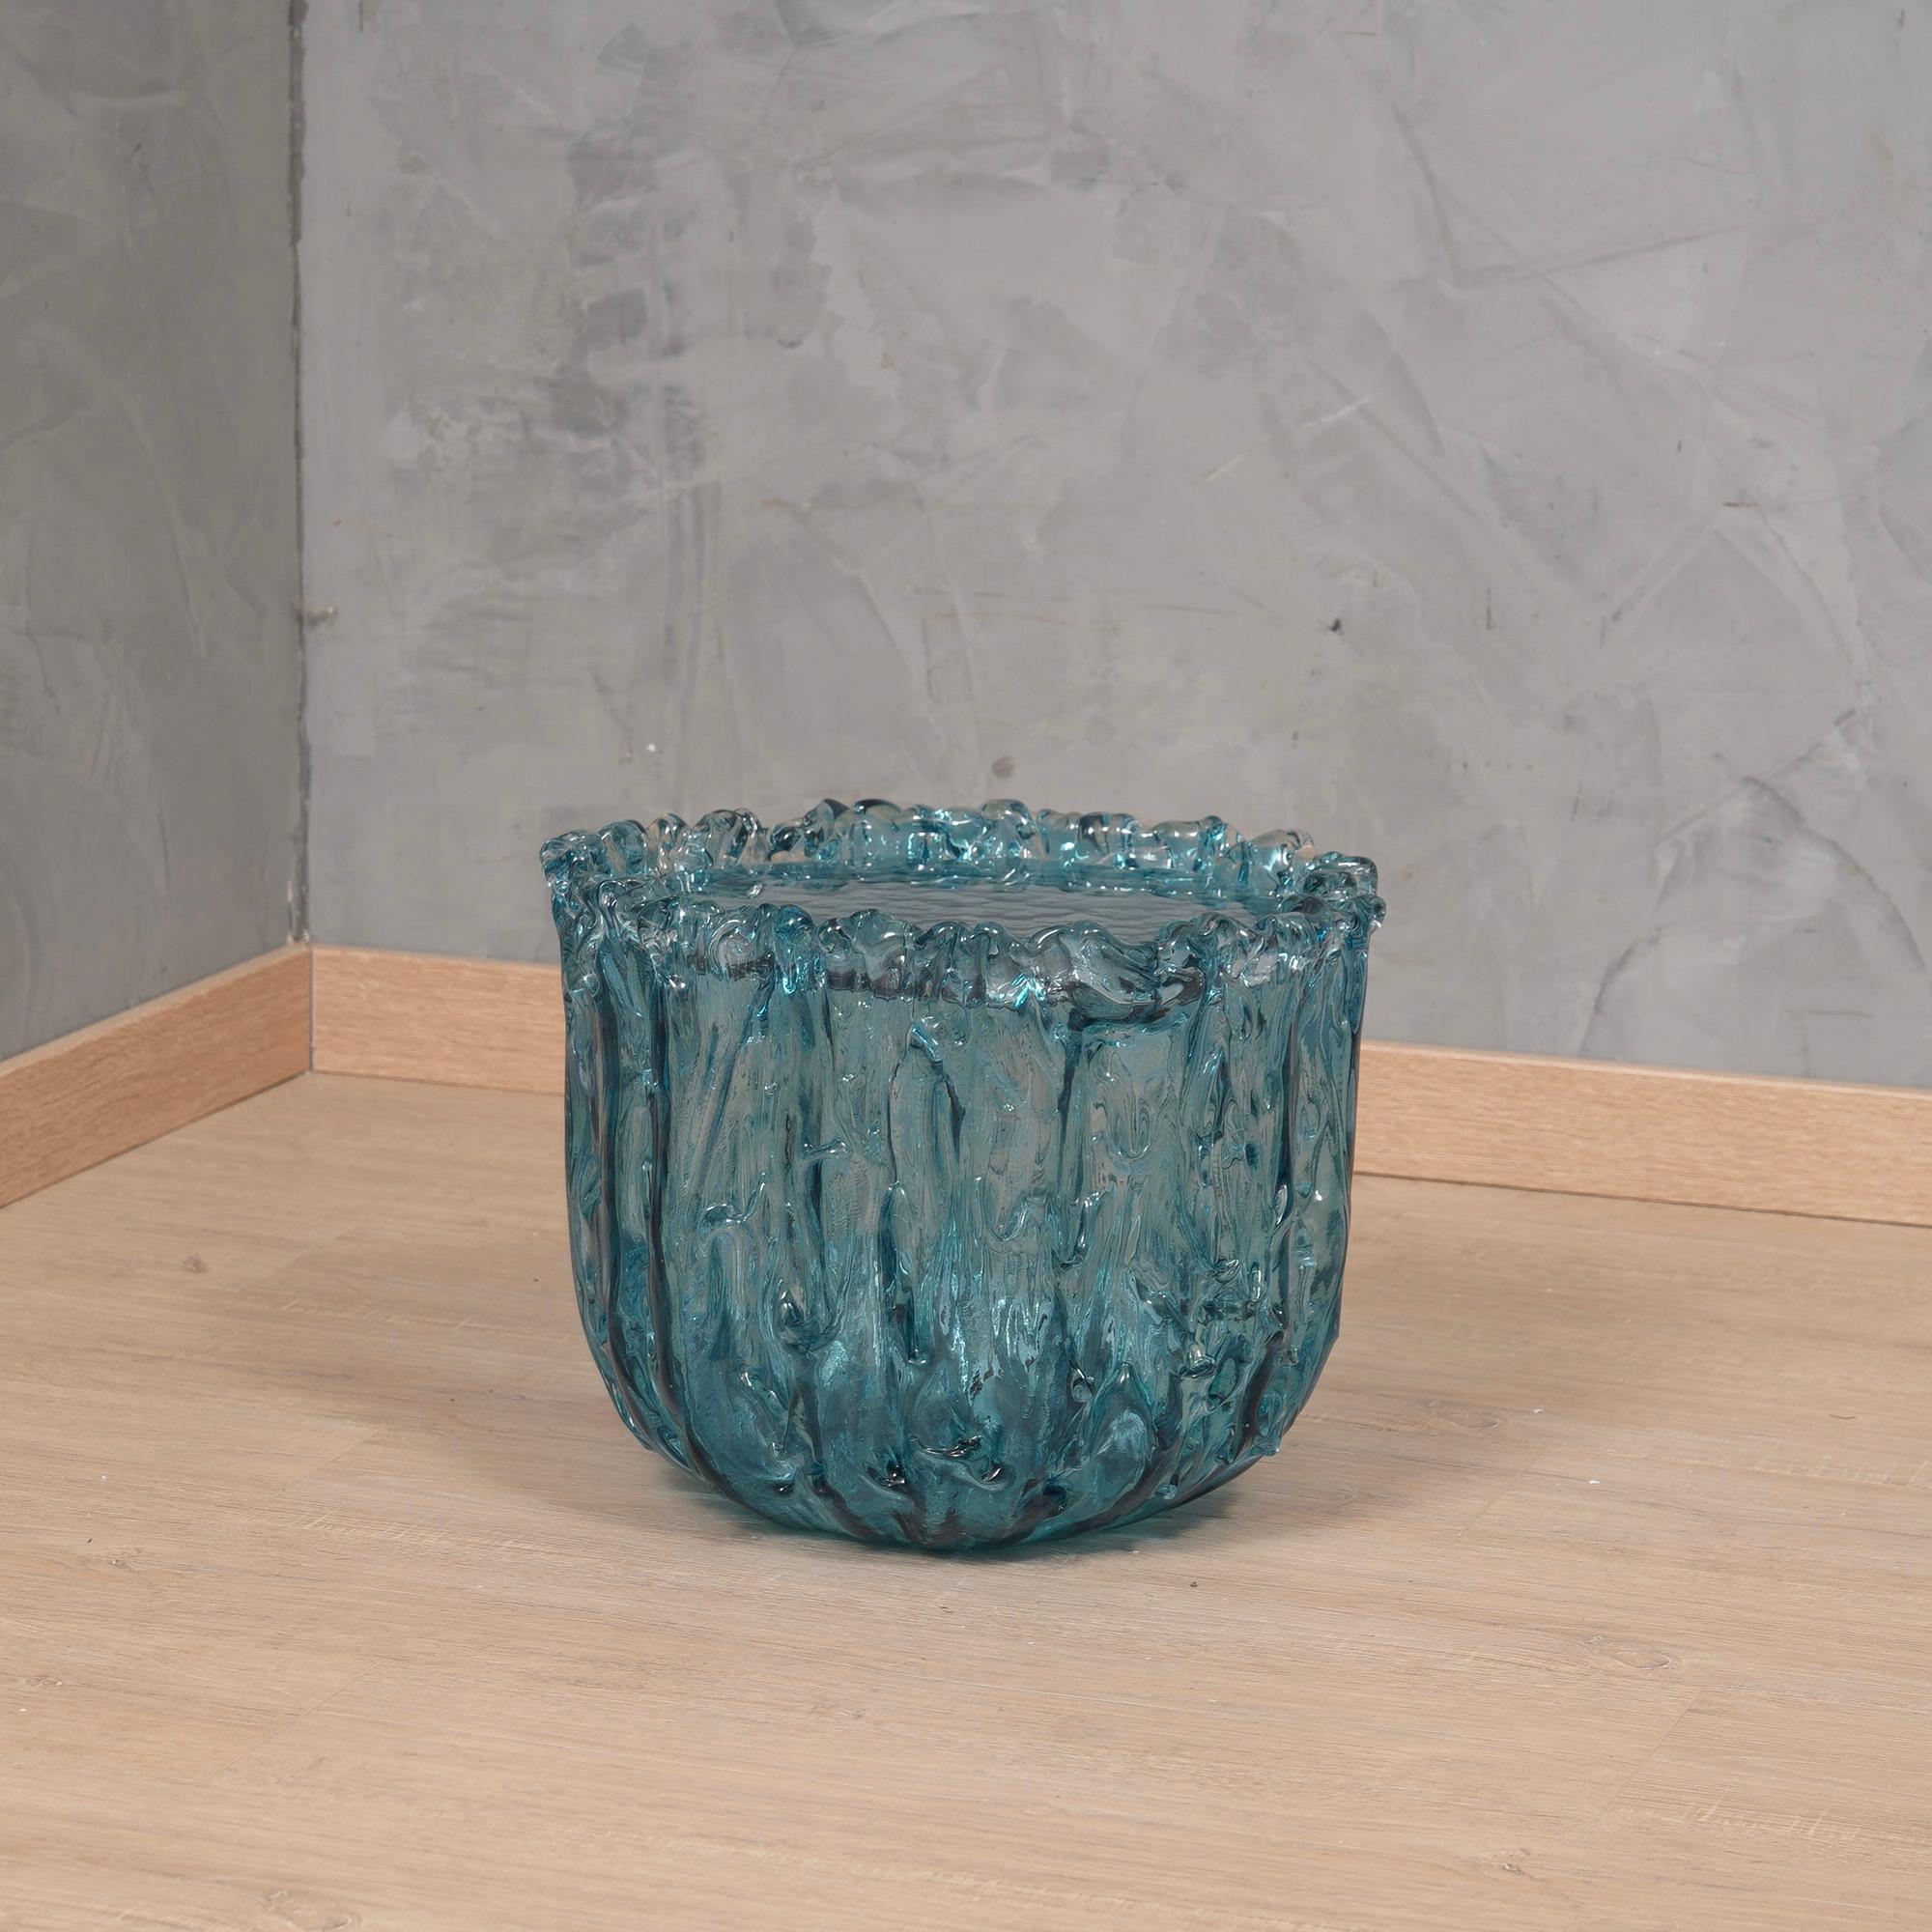 Very particular Murano glass side table with an exciting blue color, with a very original design, a real Murano glass sculpture.

The coffee table is made up of a large vase-shaped base in Murano glass, and a disc, also in Murano glass, which is